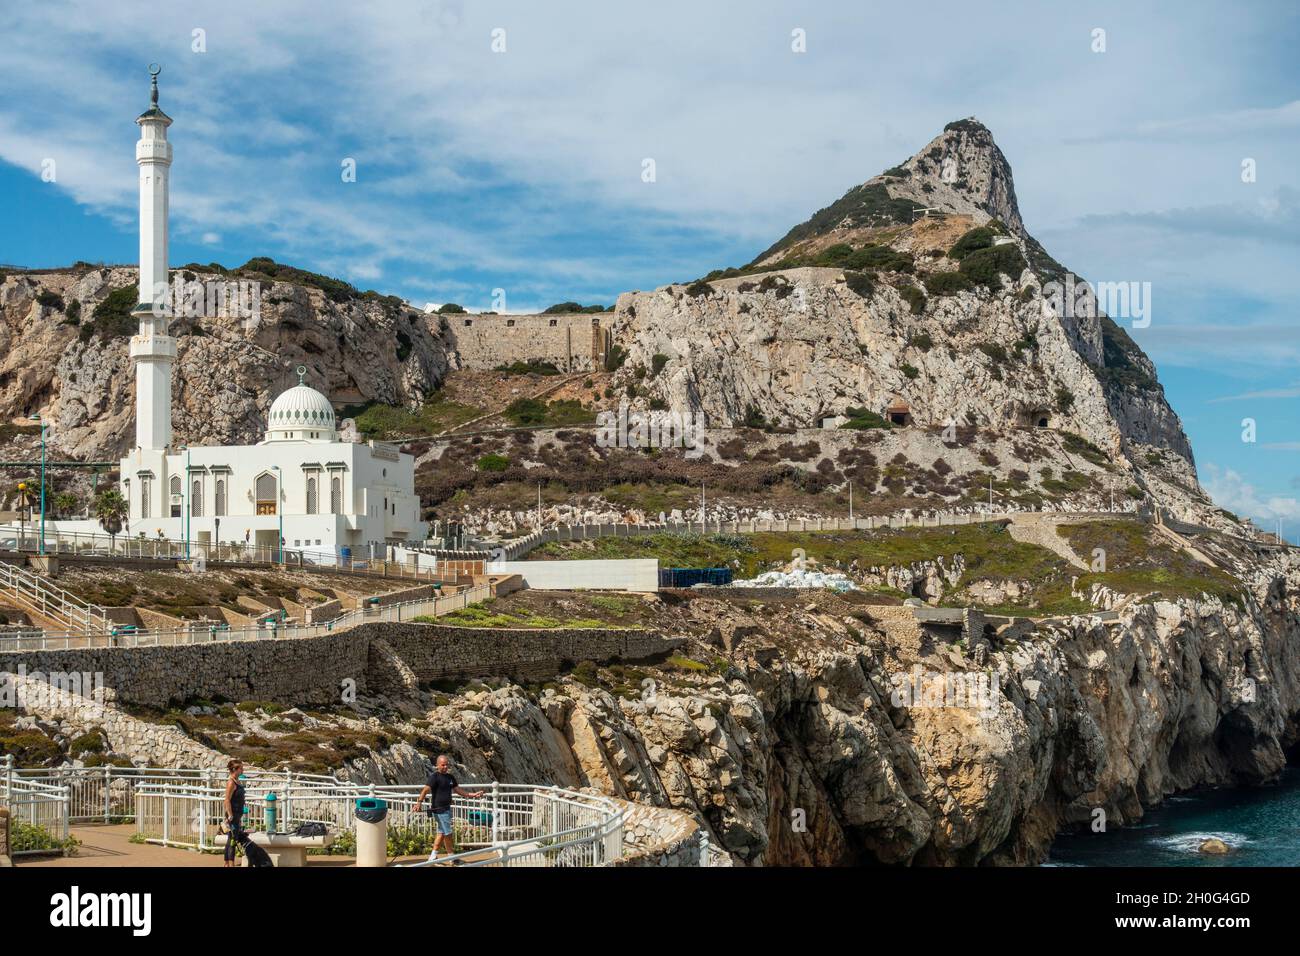 The Ibrahim-al-Ibrahim Mosque, at Europa Point, Gibraltar, with the Rock of Gibraltar in the background. Stock Photo